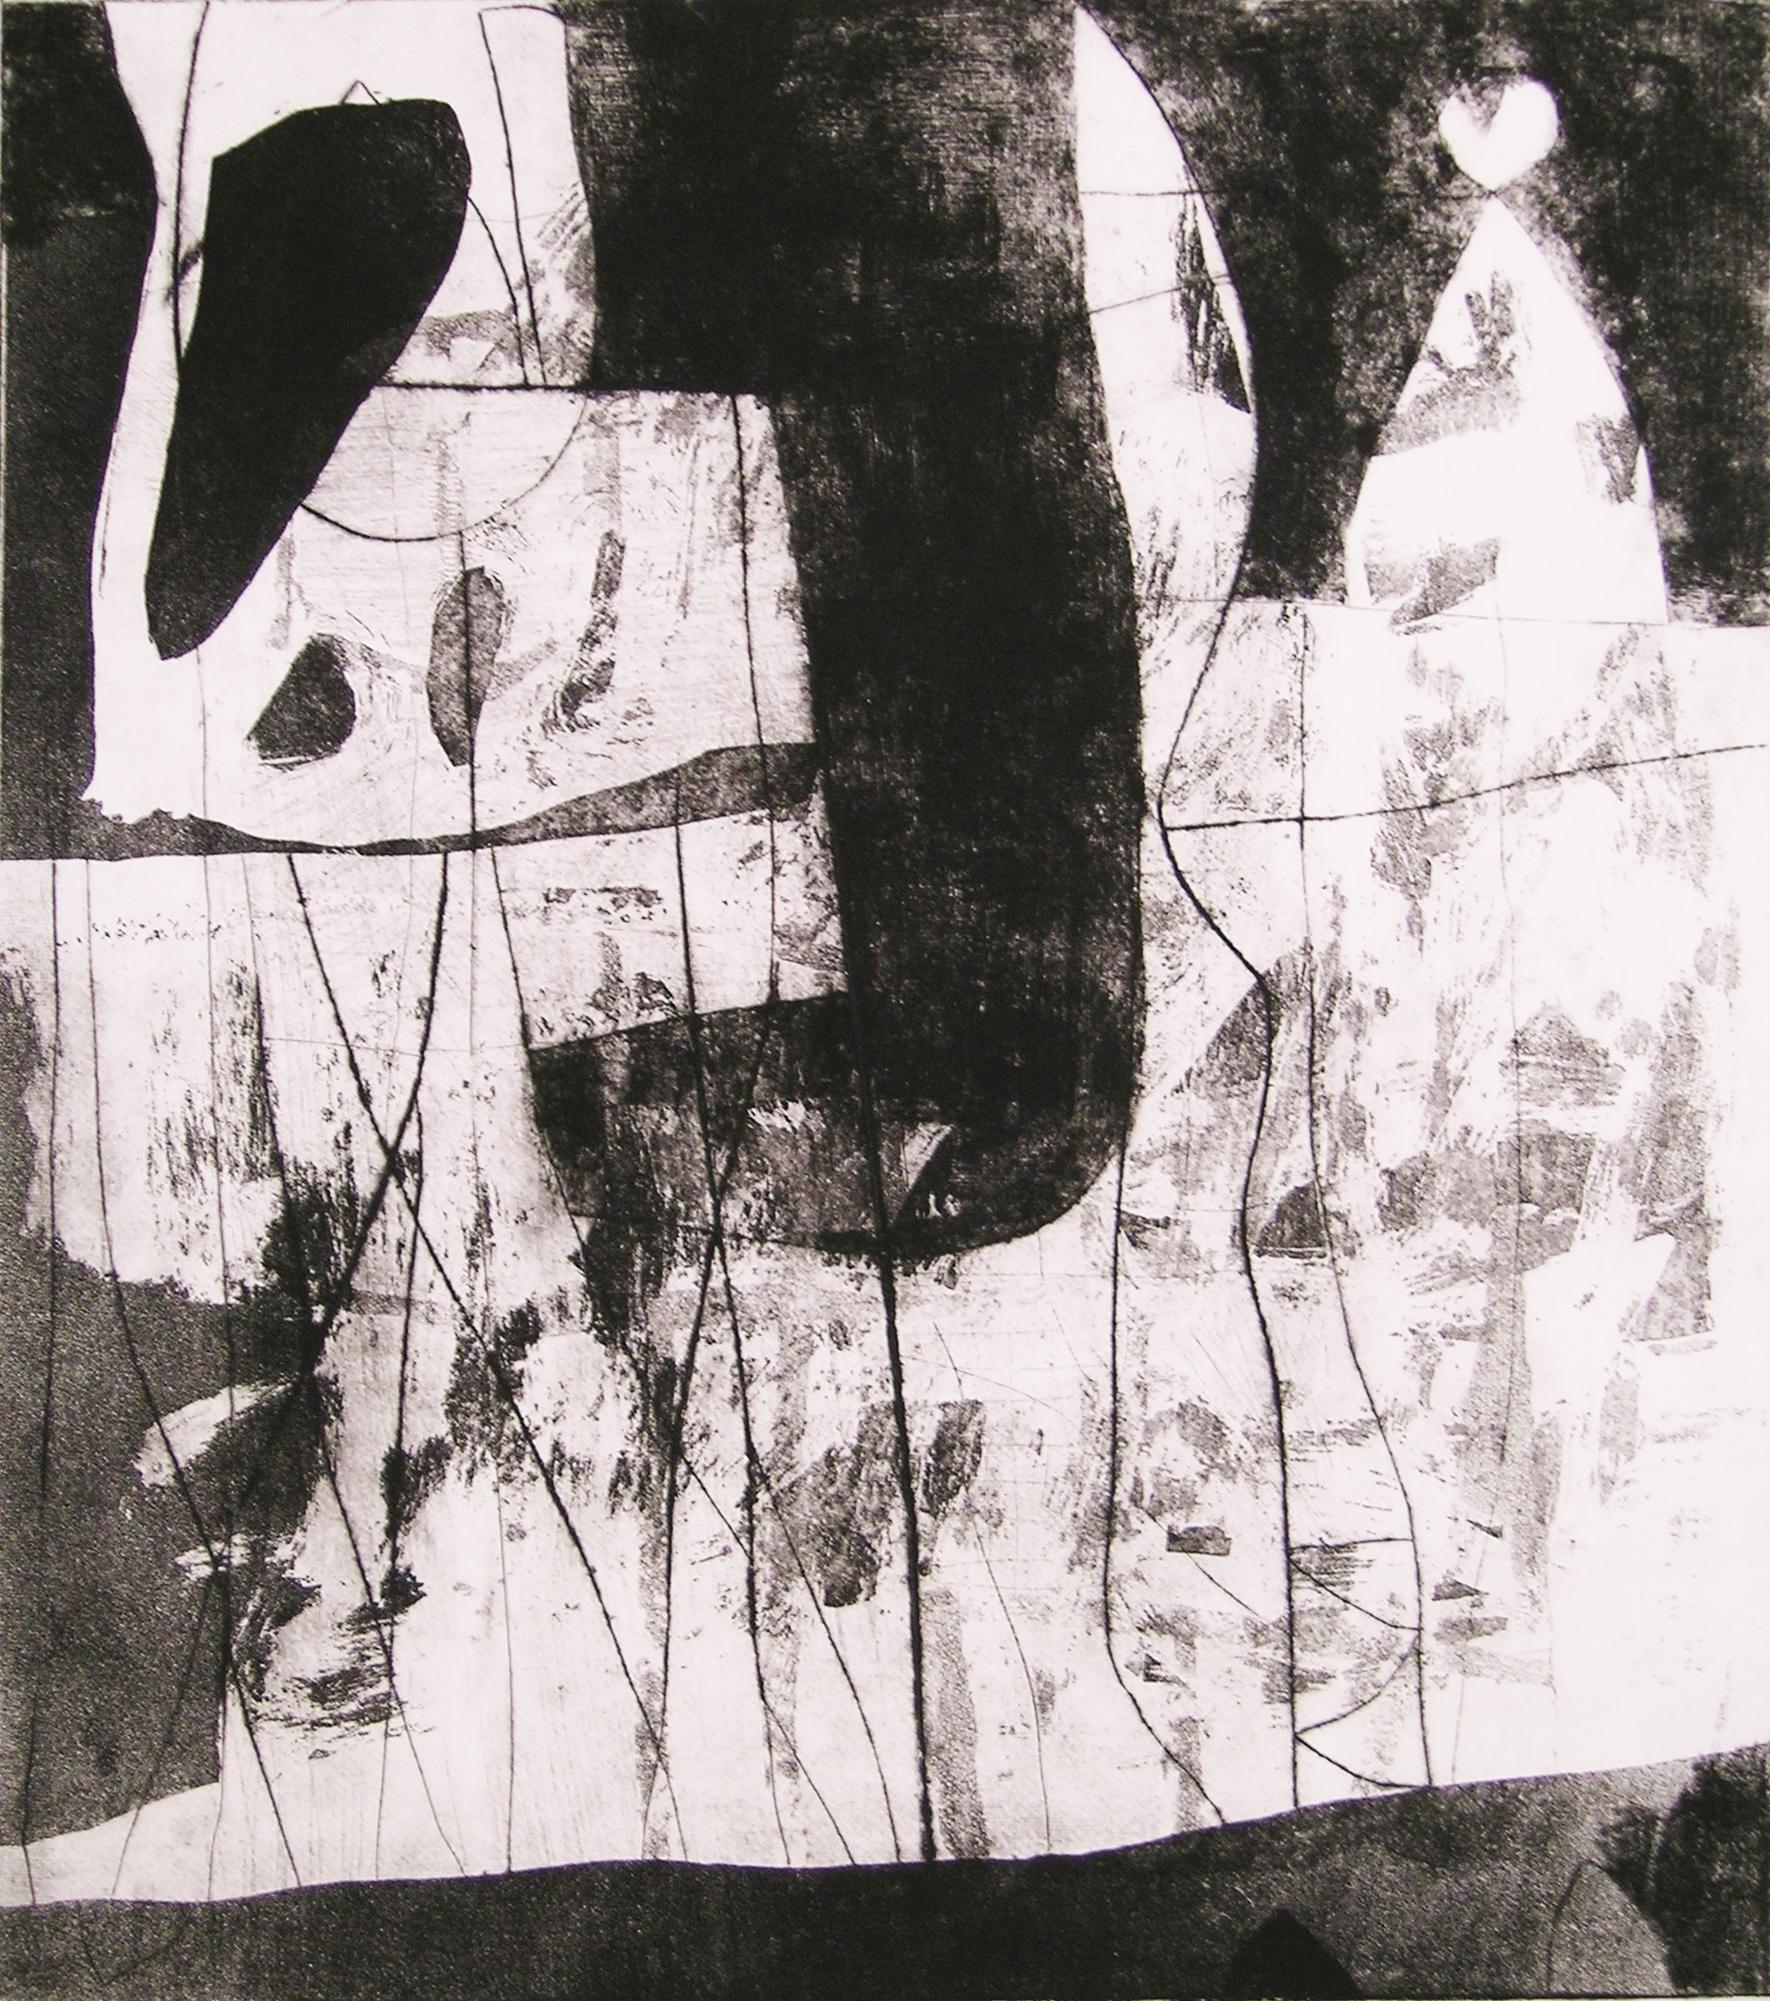 Alexis Portilla Figurative Painting - 40x30" - Abstract Black and White Print - unframed